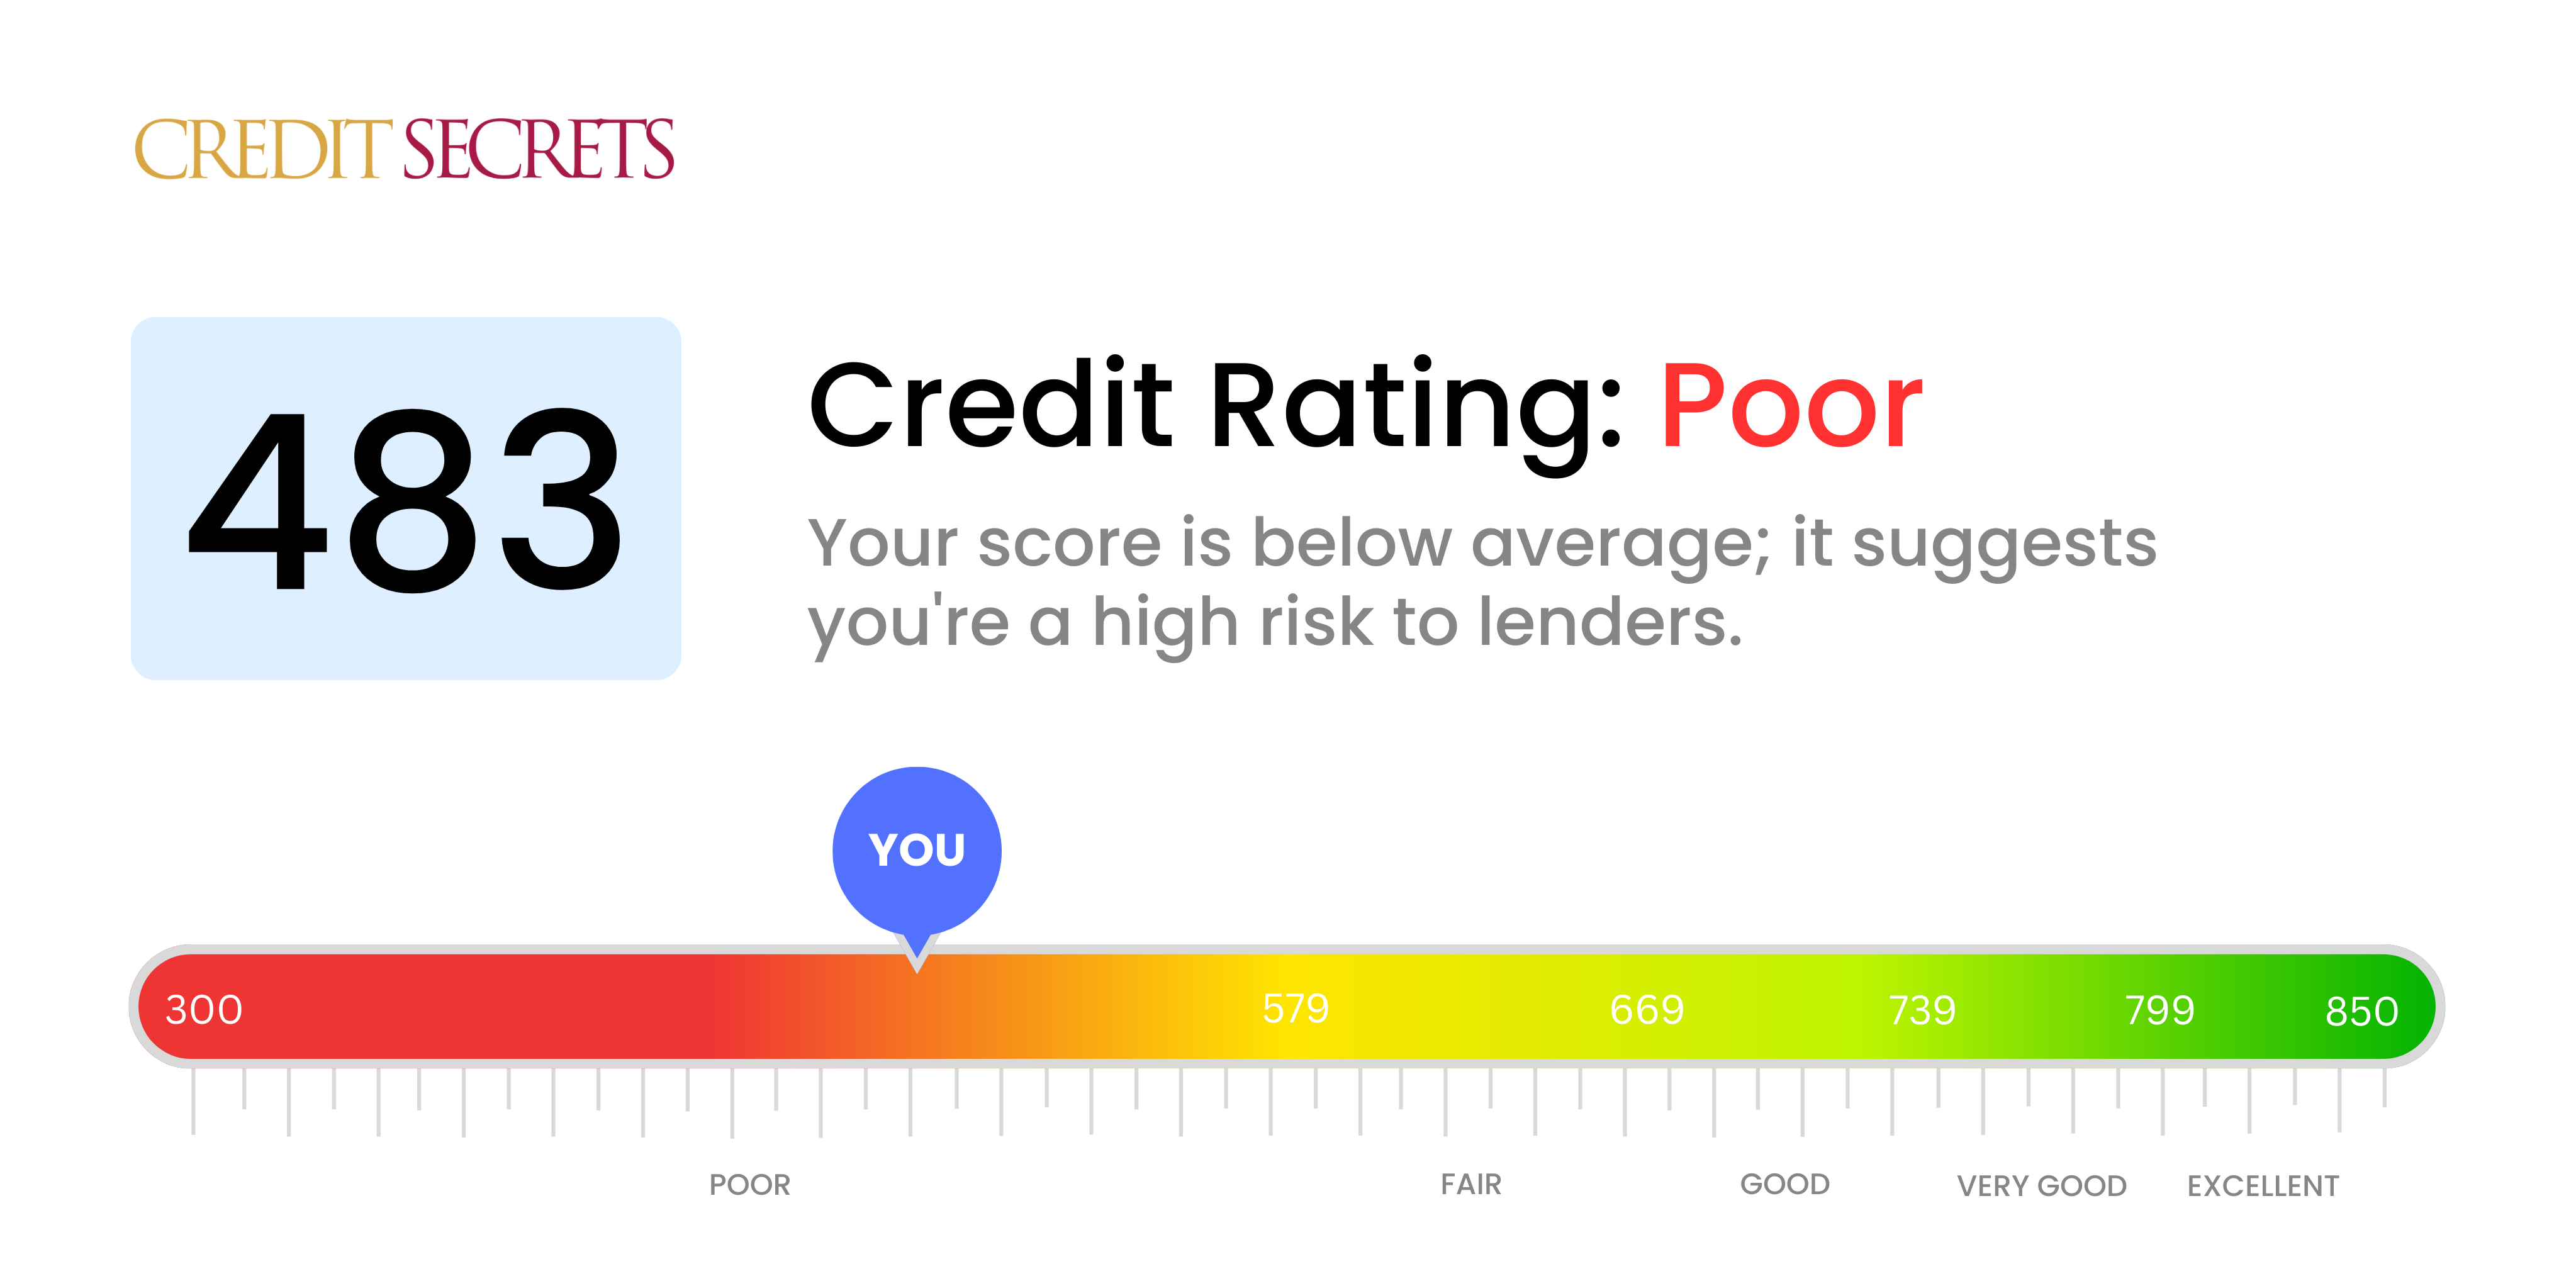 Is 483 a good credit score?